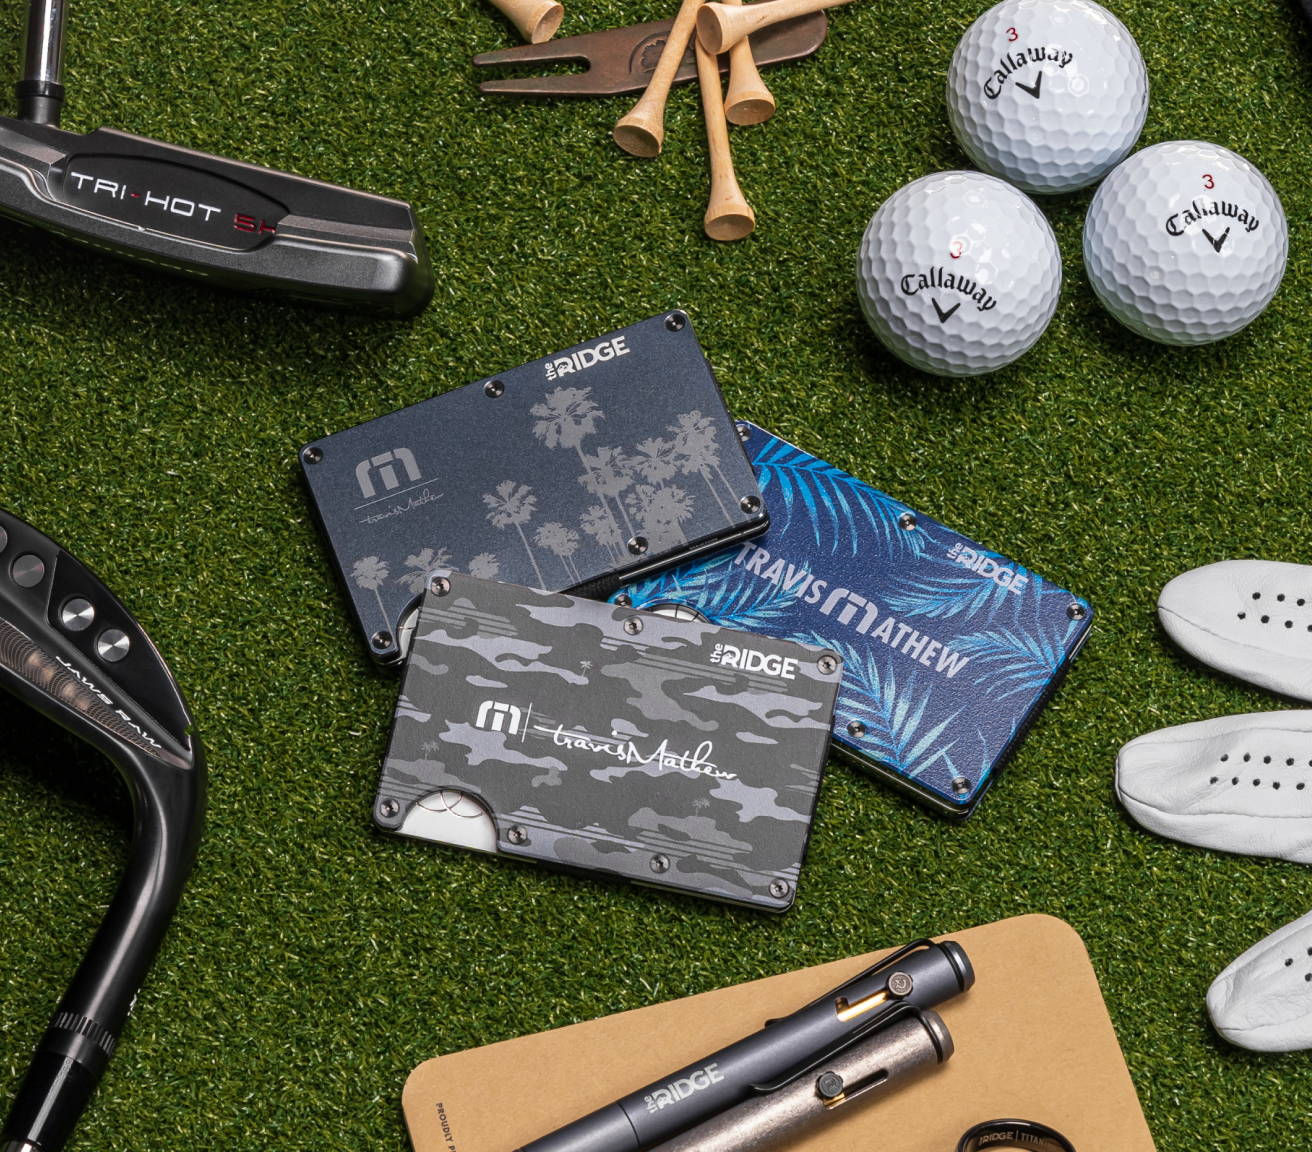 TravisMathew Palm Ridge wallets with other Ridge products and golf gears